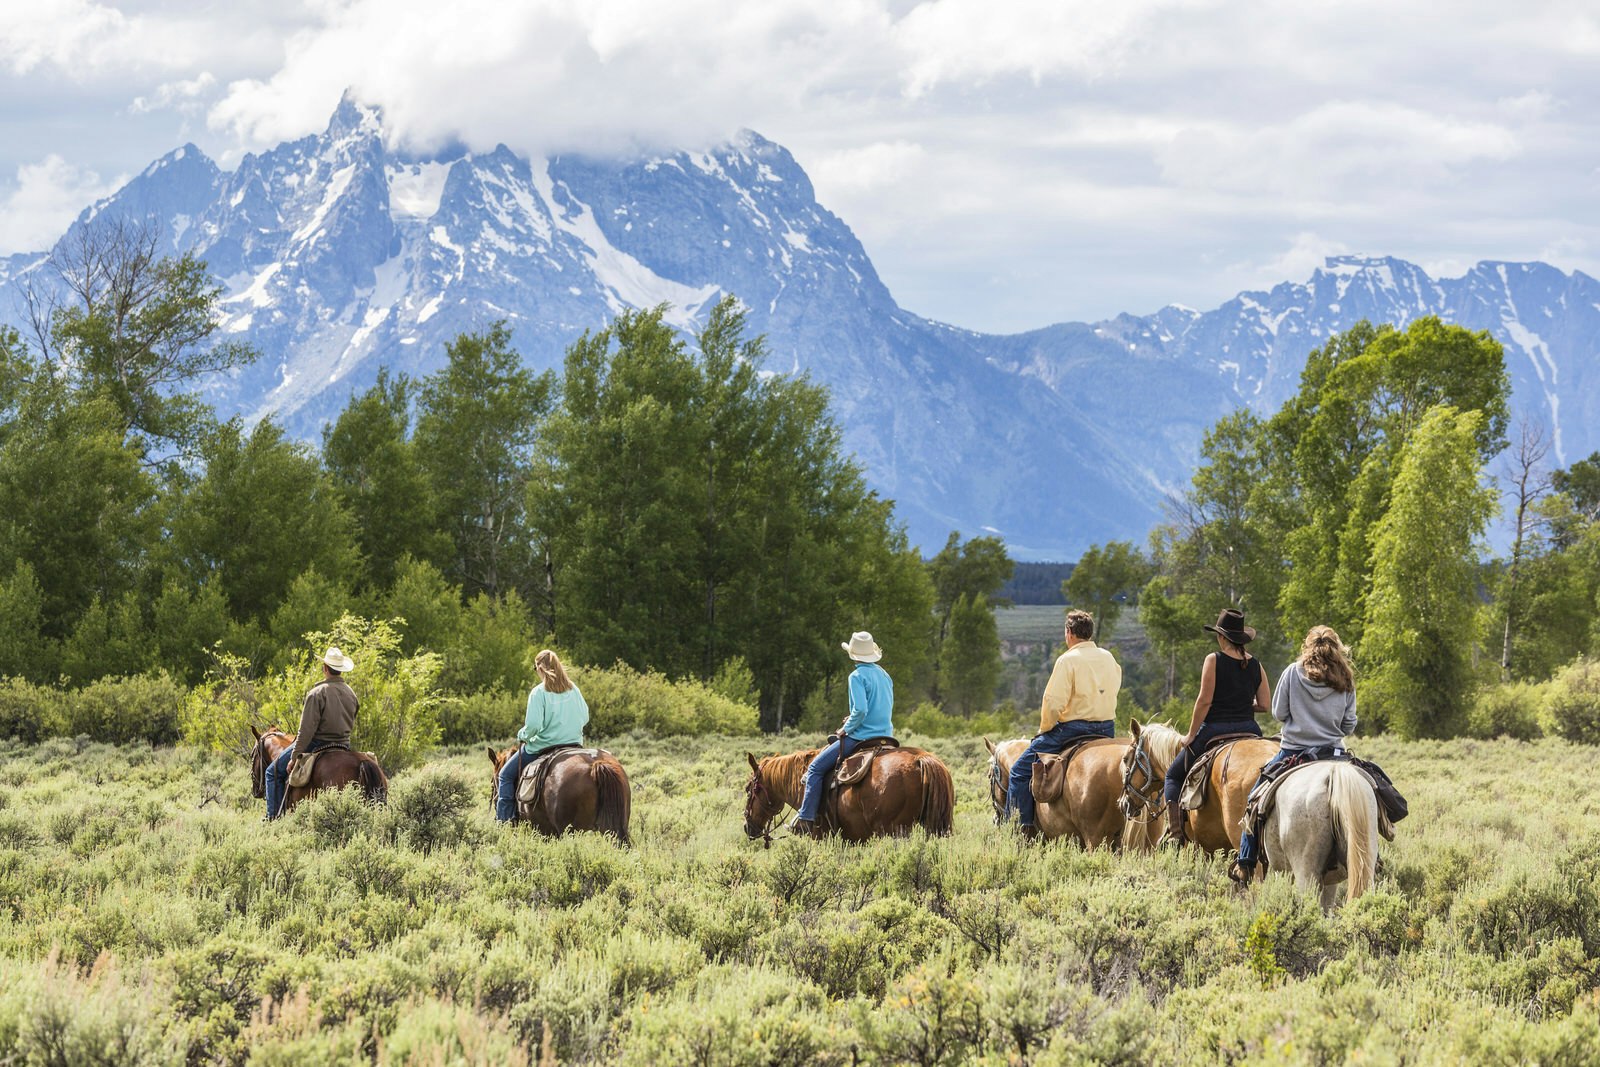 A group of horseback riders of all ages meanders through a meadow at the base of a mountain near Grand Teton National Park.